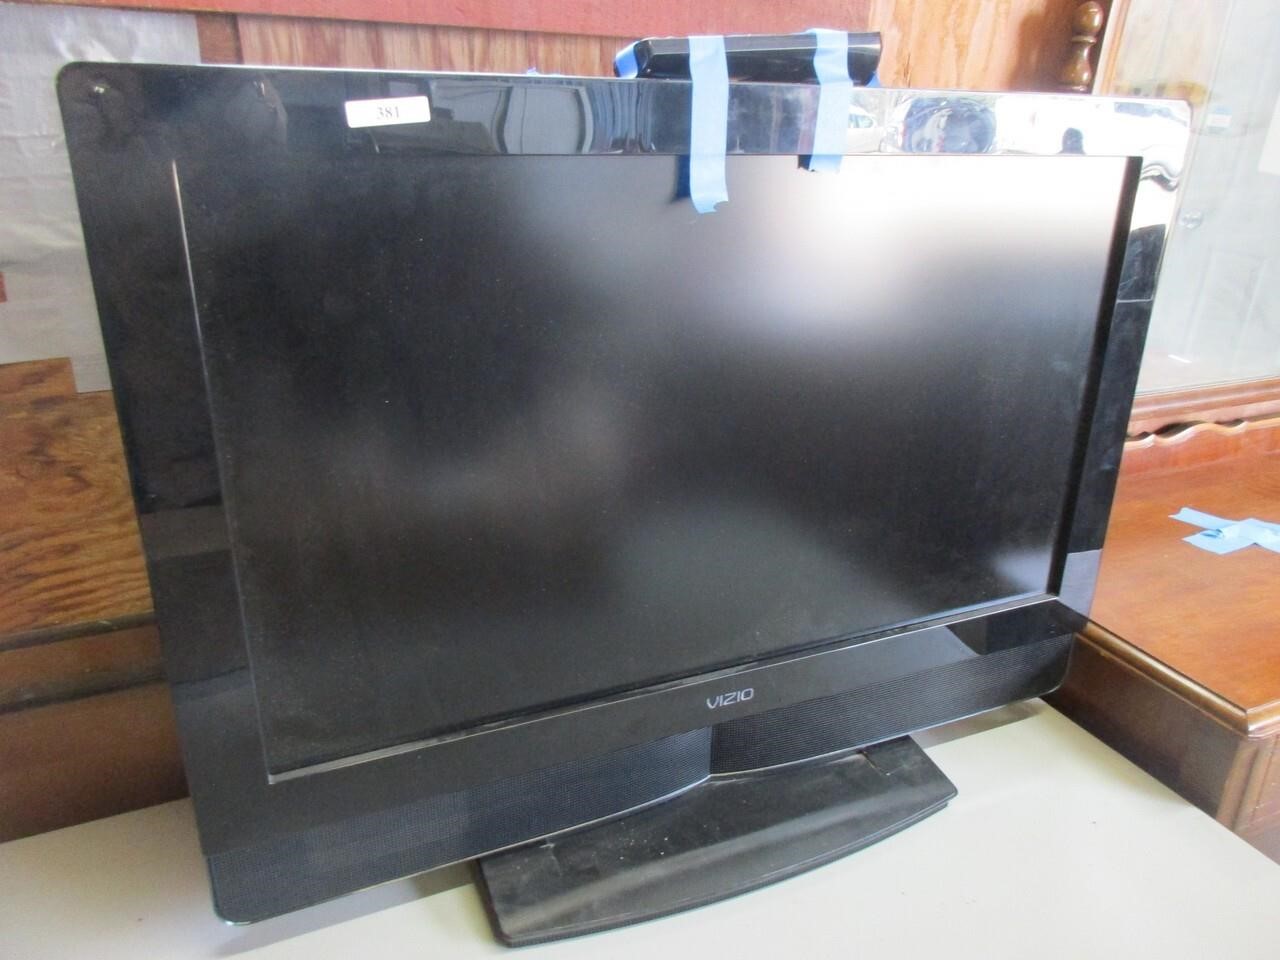 $Deal 31 inch Visio TV with remote, works